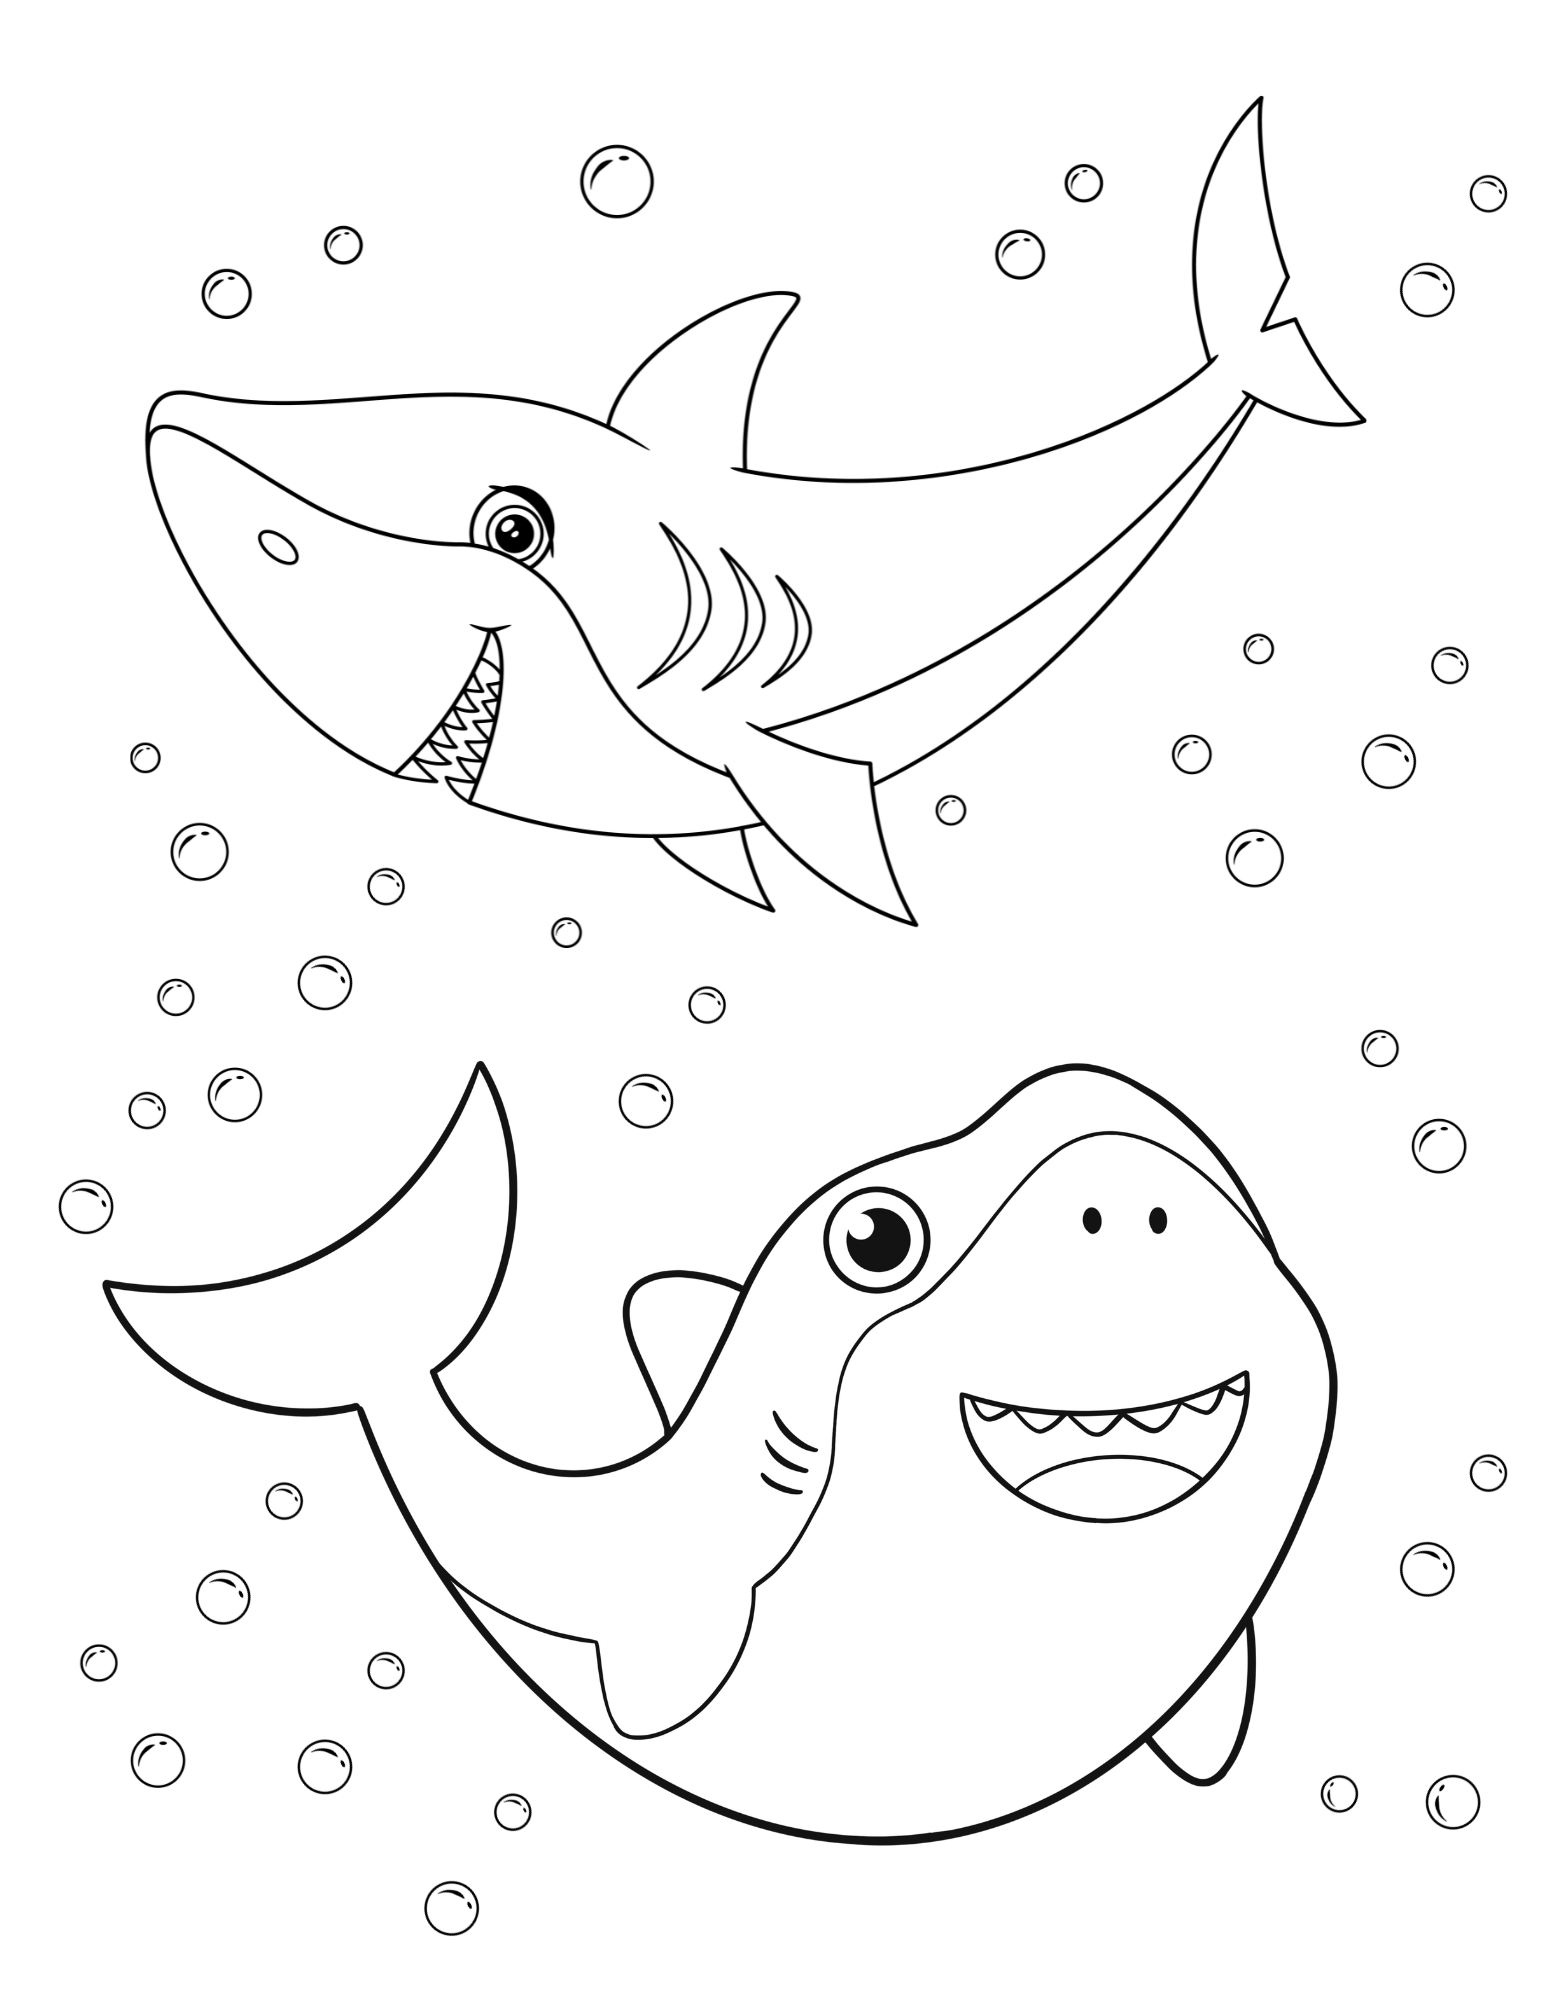 Spectacular shark coloring pages for kids and adults